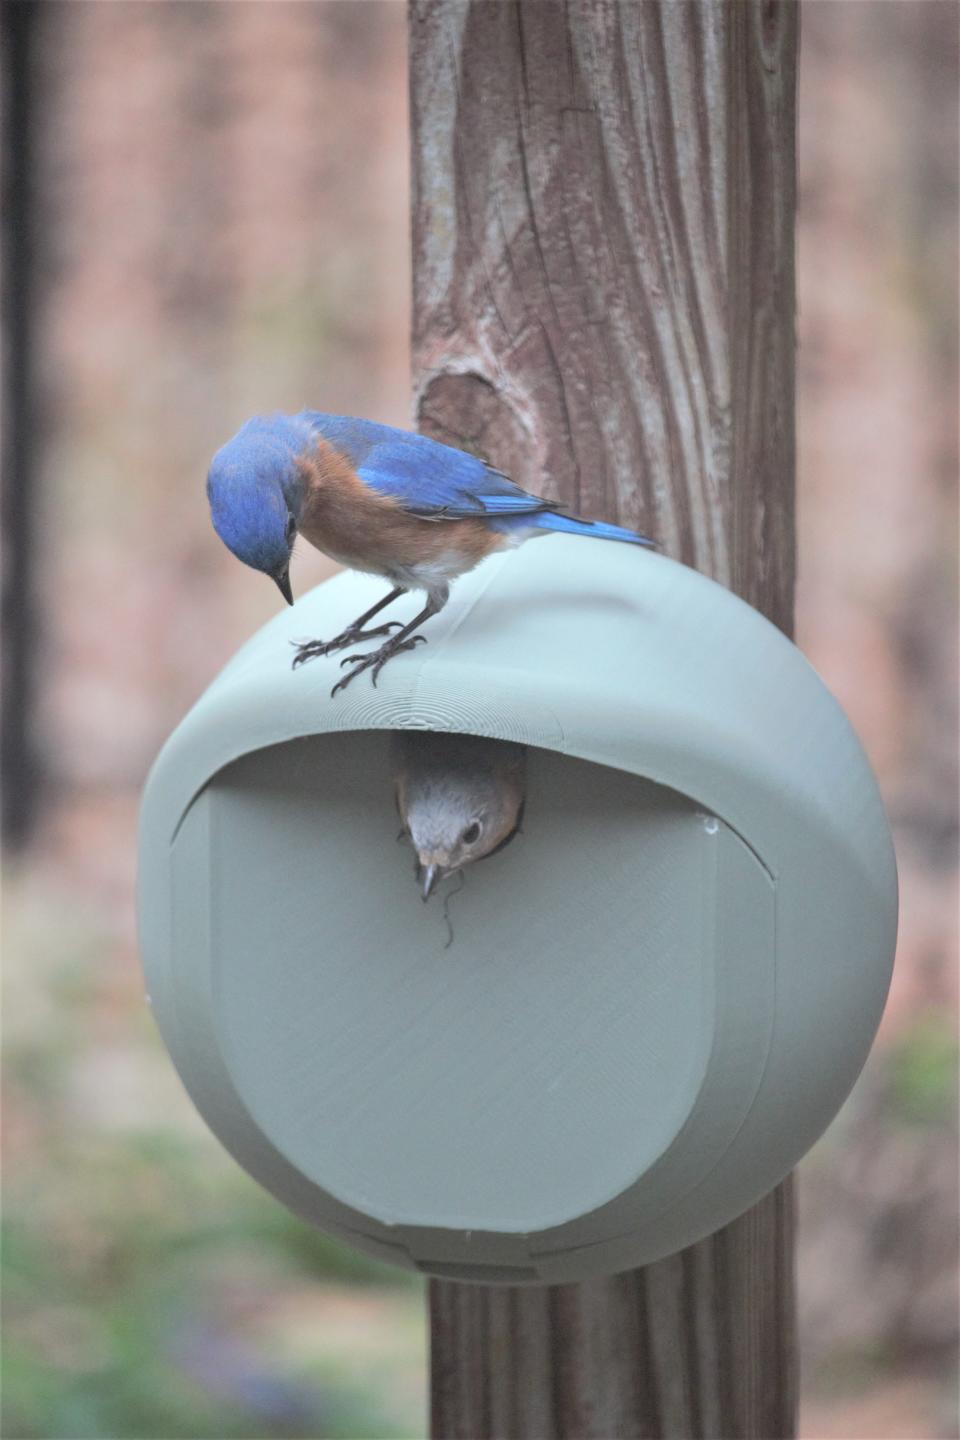 A male Eastern Bluebird waits for his mate - look closely for her - to finish her inspection of the Borbhouse, a nest box made by Luke Coe-Starr, the Oak Ridge Bird Man.